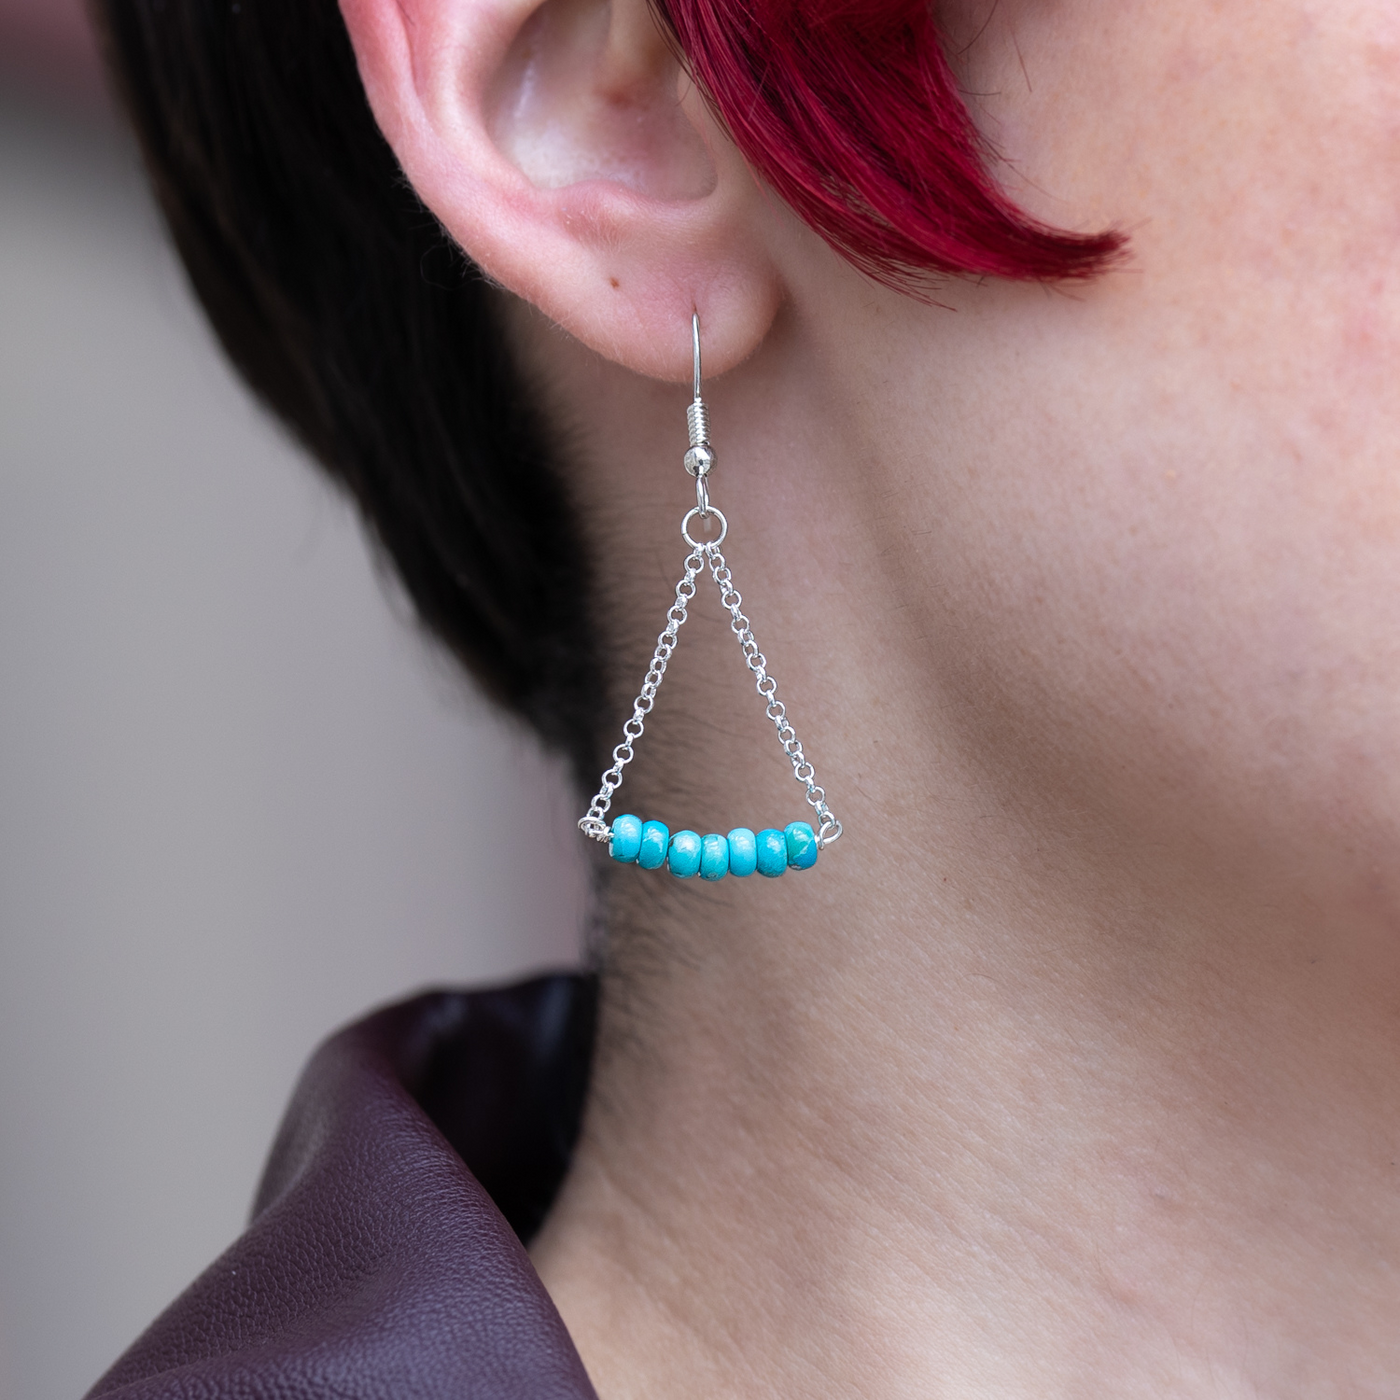 Sterling Silver Chandelier Earrings with Turquoise beads